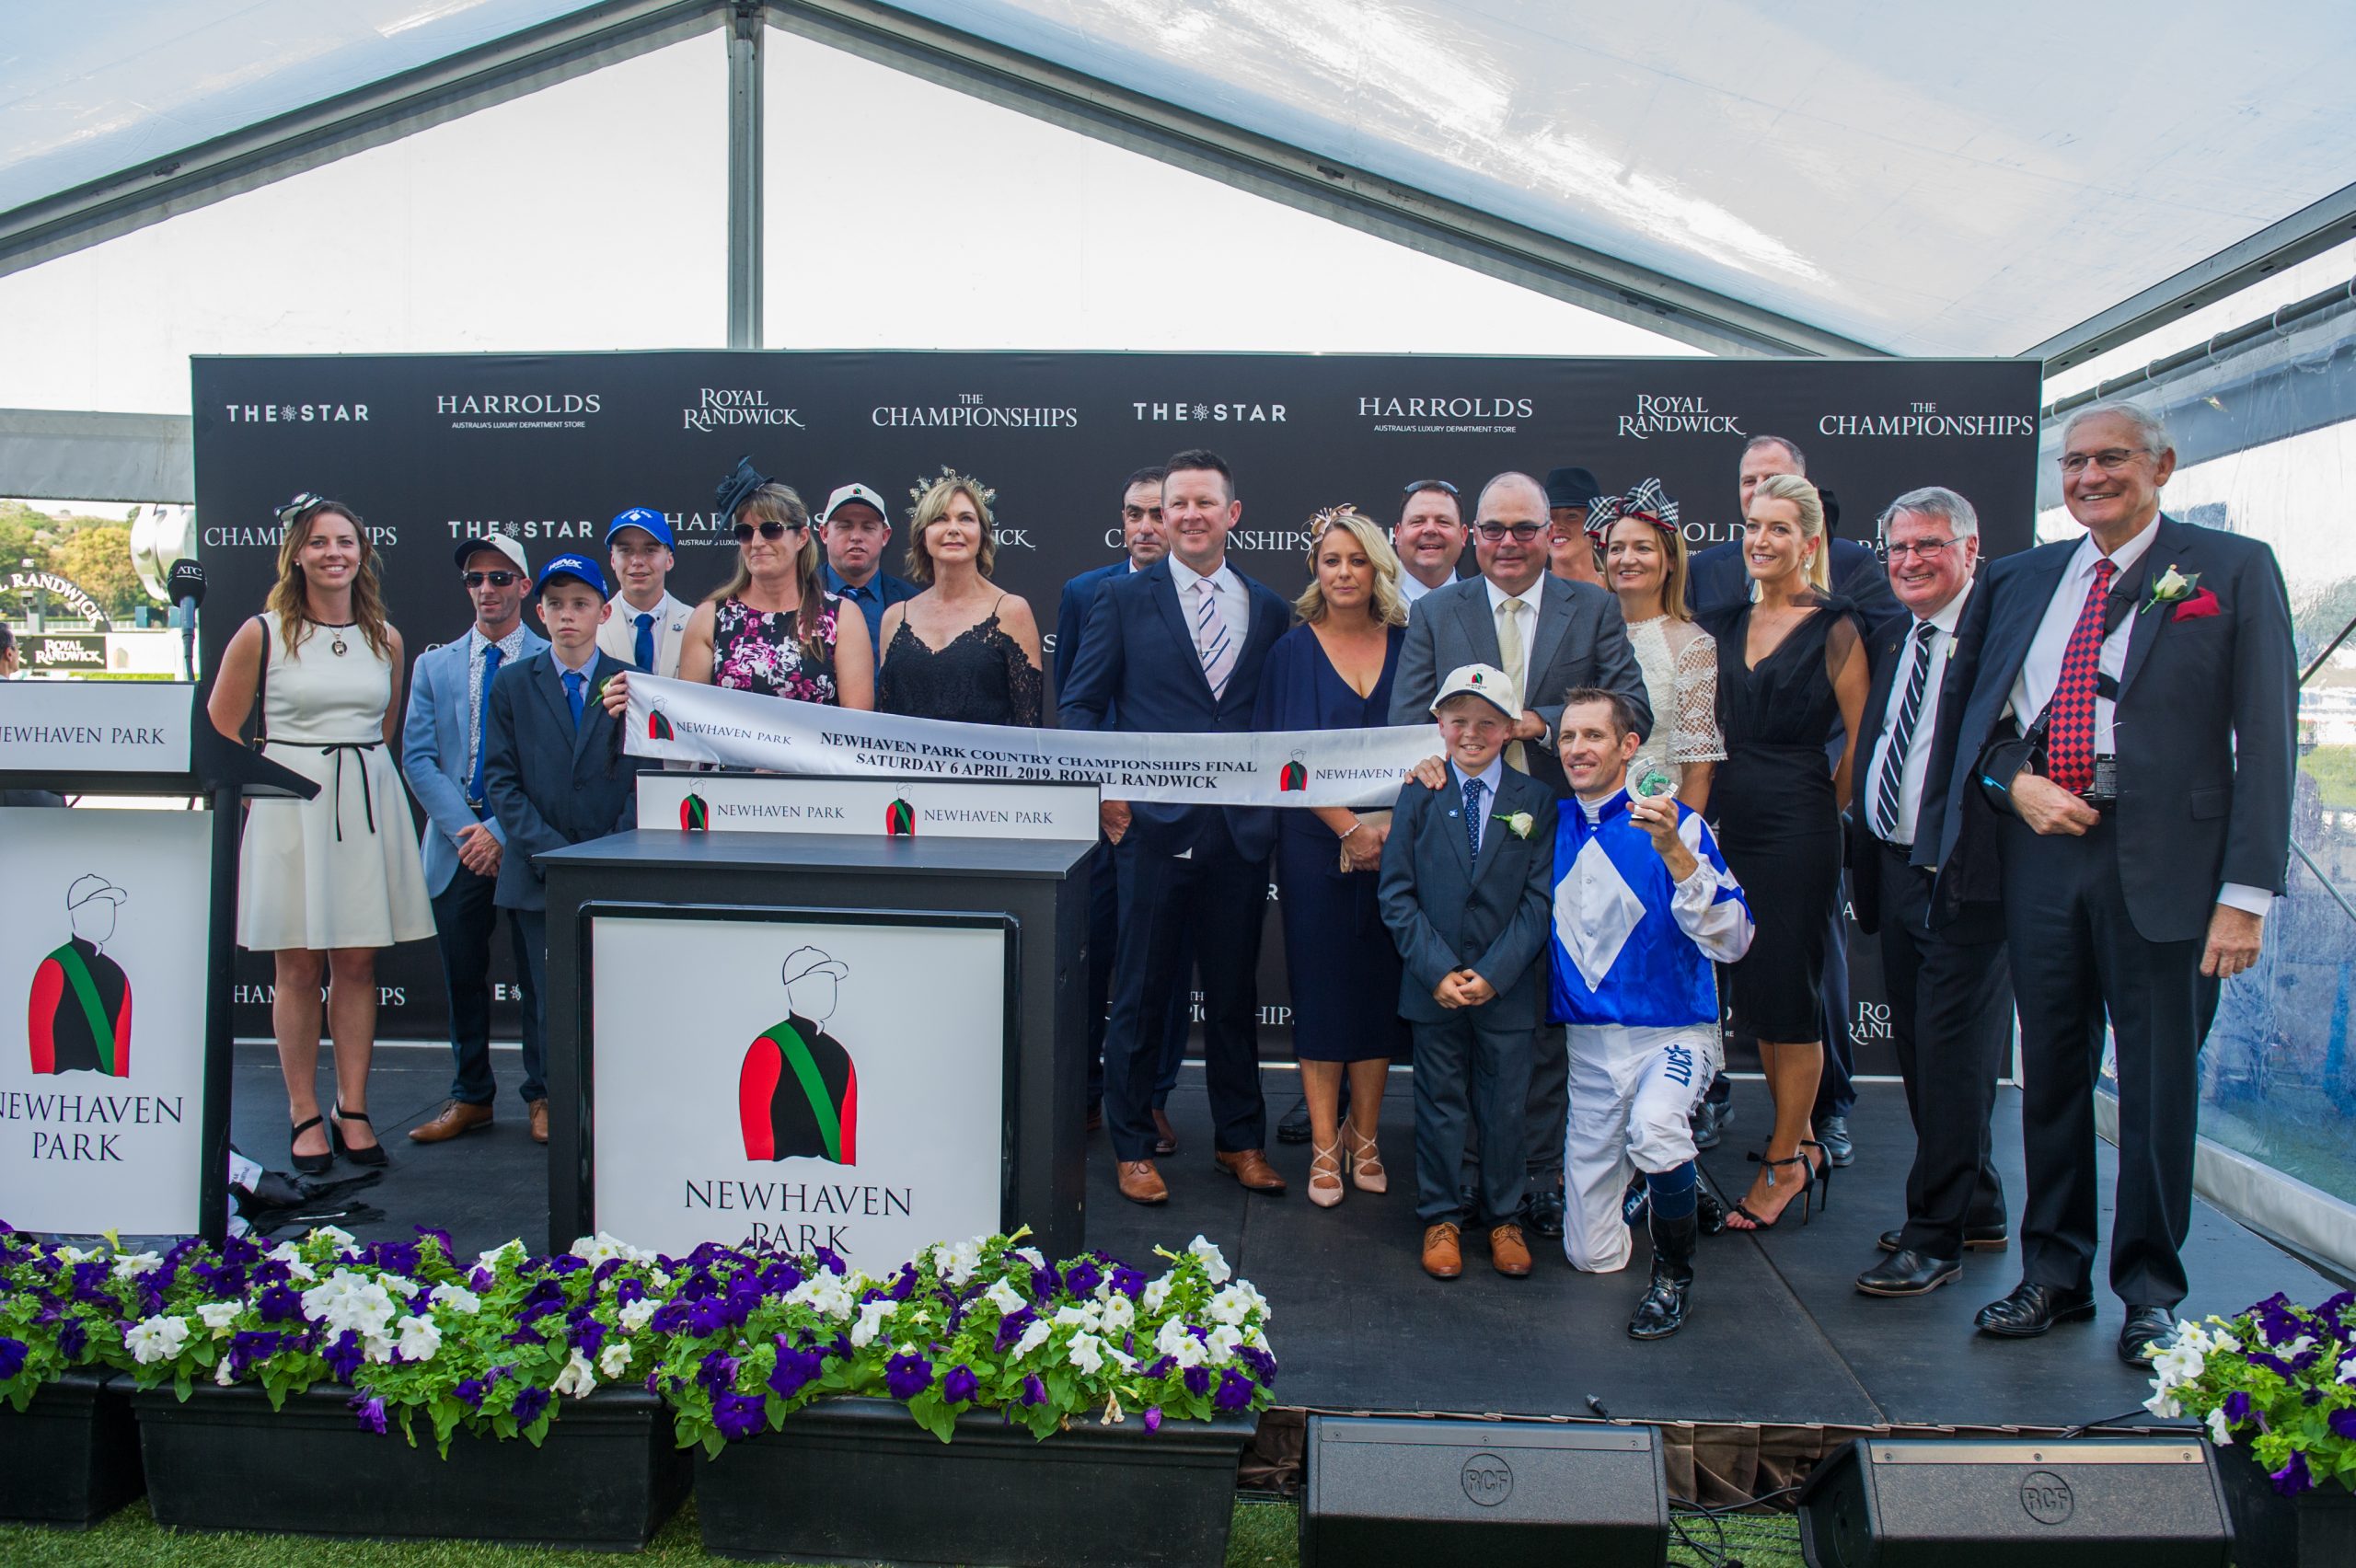 NEWHAVEN PARK EXTENDS COMMITMENT TO THE COUNTRY CHAMPIONSHIPS